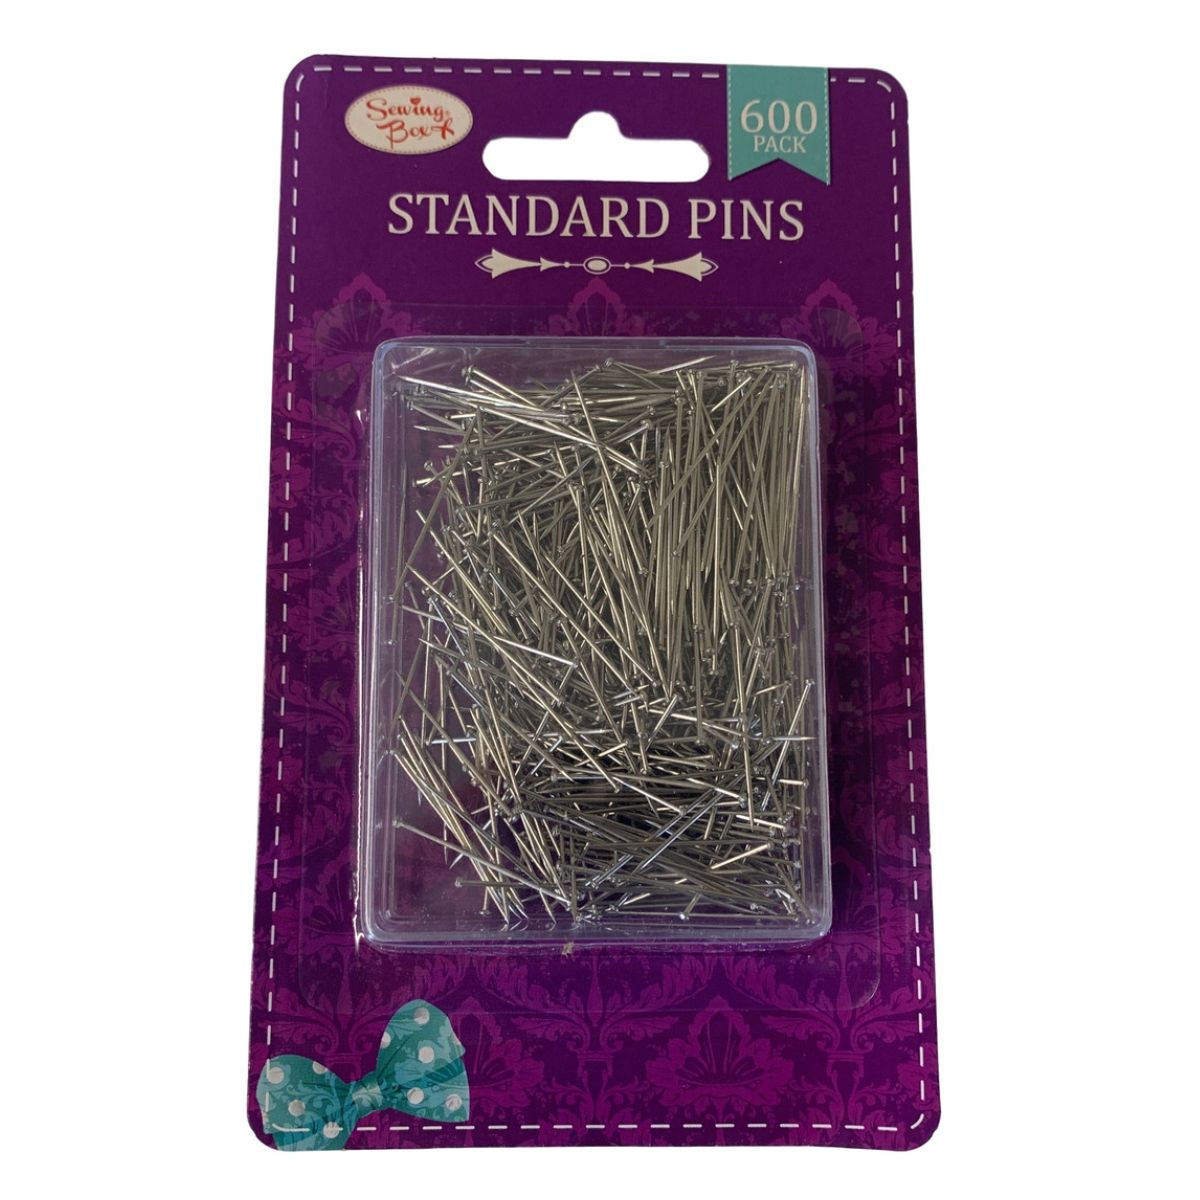 Packaging of Sewing Box - Standard Pins - 600pcs, displayed on a purple background.